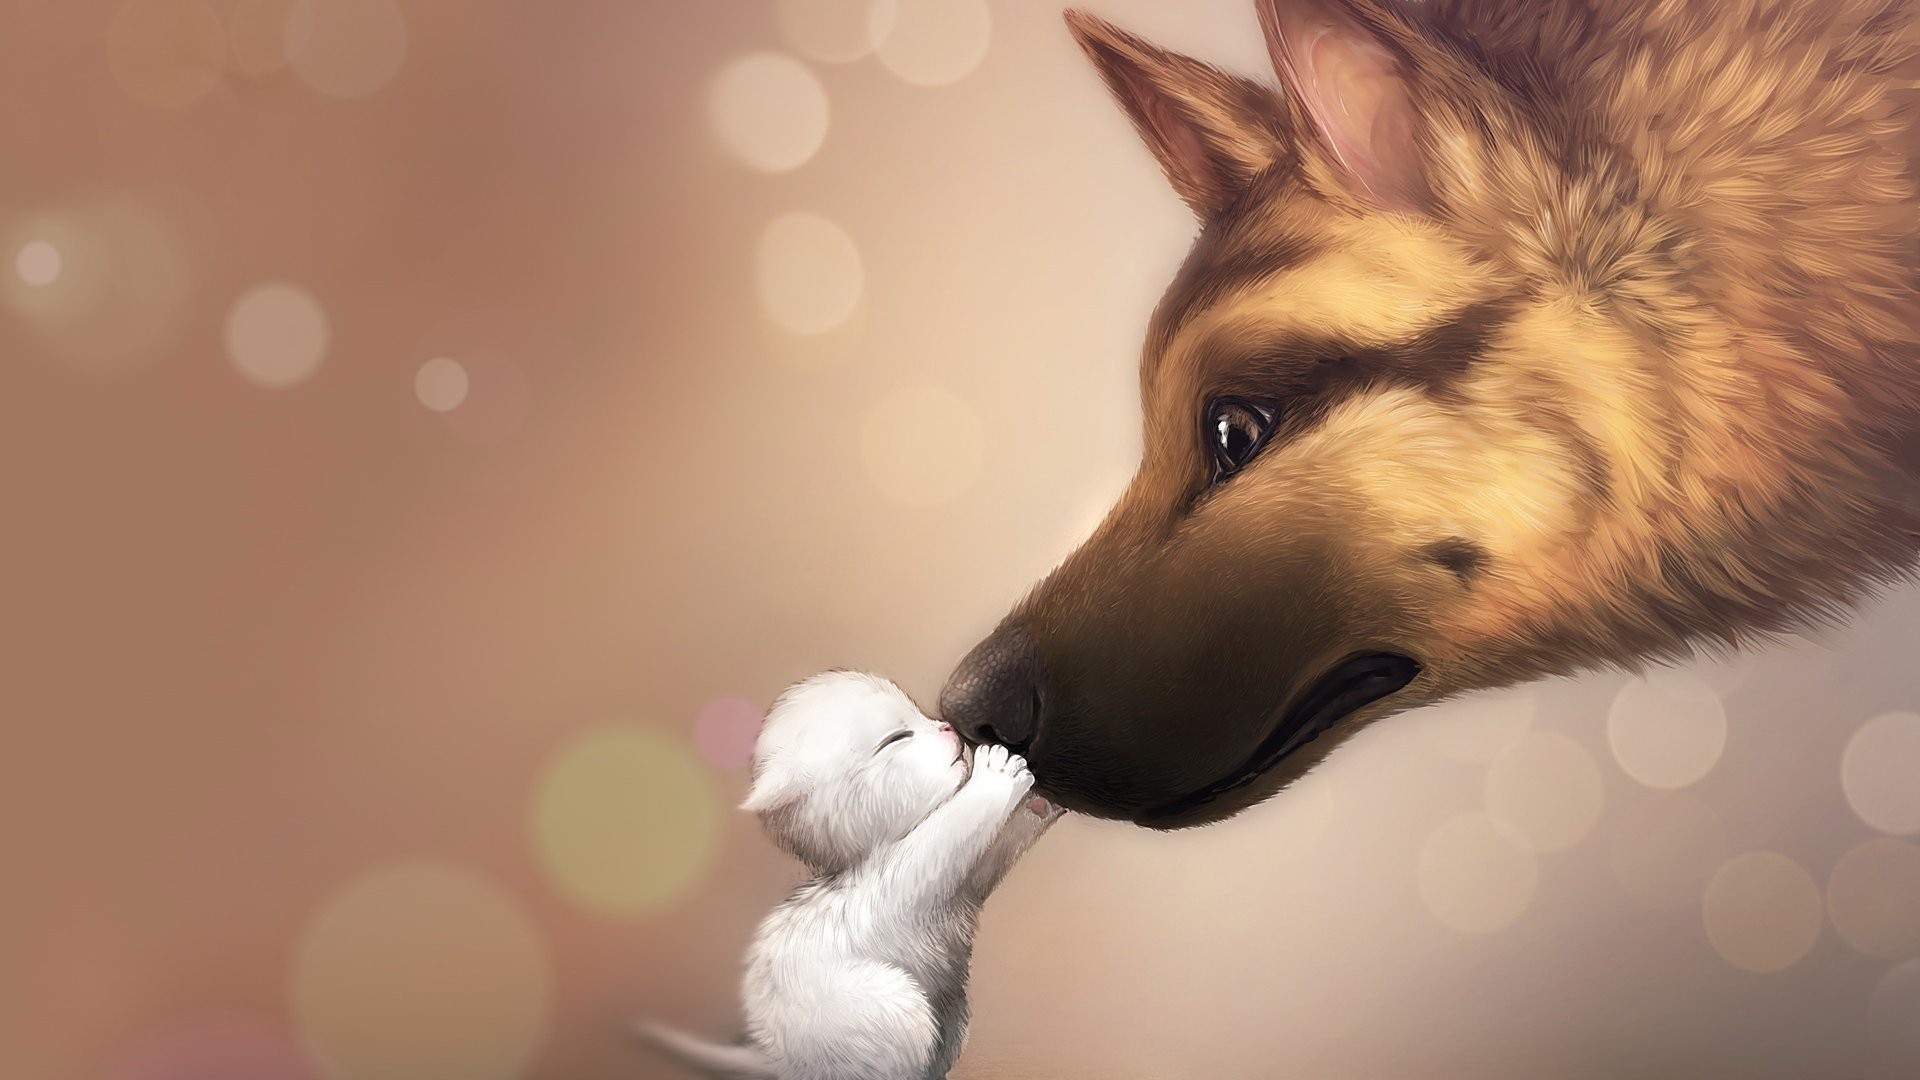 1920x1080 Love, Animated, Cute, Dog, Wallpaper, Full, Screen, High, Resolution,  Pictures, Free, For, Desktop, Background, High Resolution Photos,  Backgrounds For ...